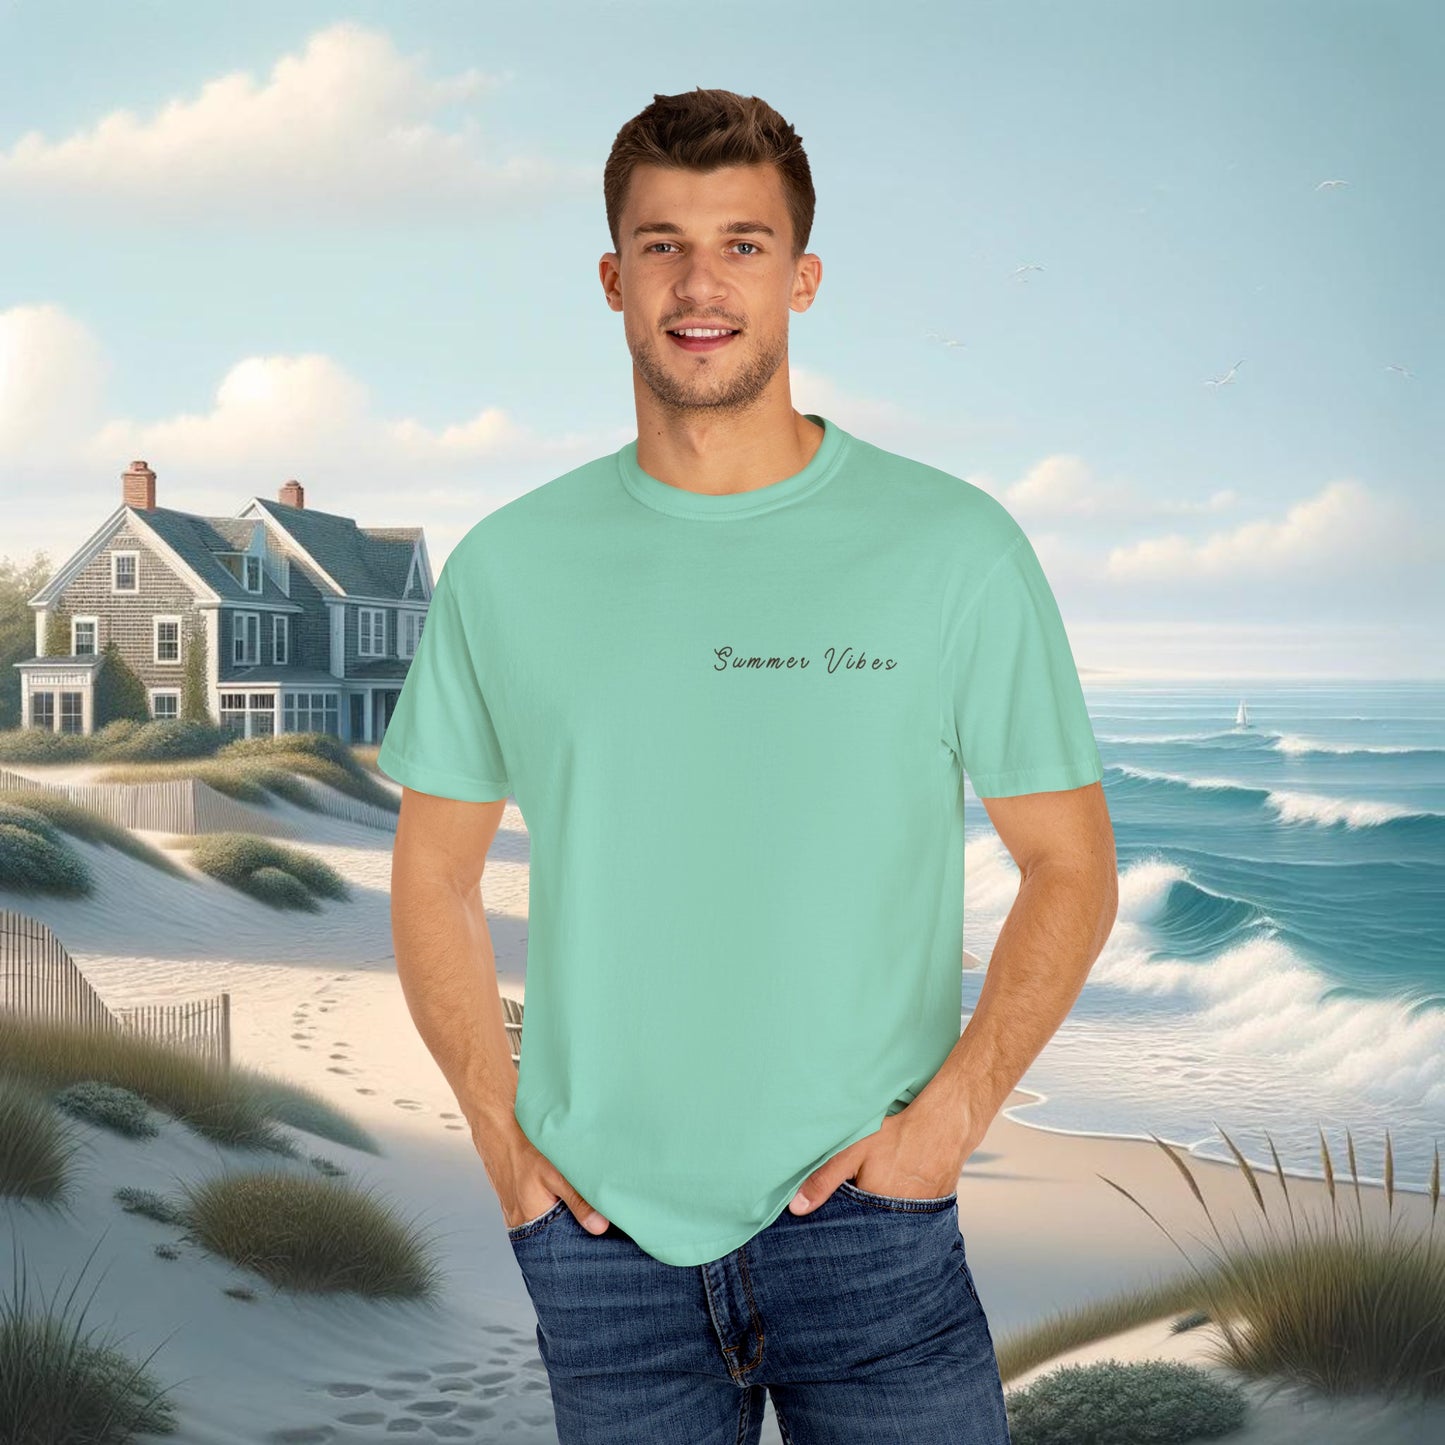 Summer Vibes T-Shirt - Comfort Colors 1717, 100% Ring-Spun Cotton, Relaxed Fit